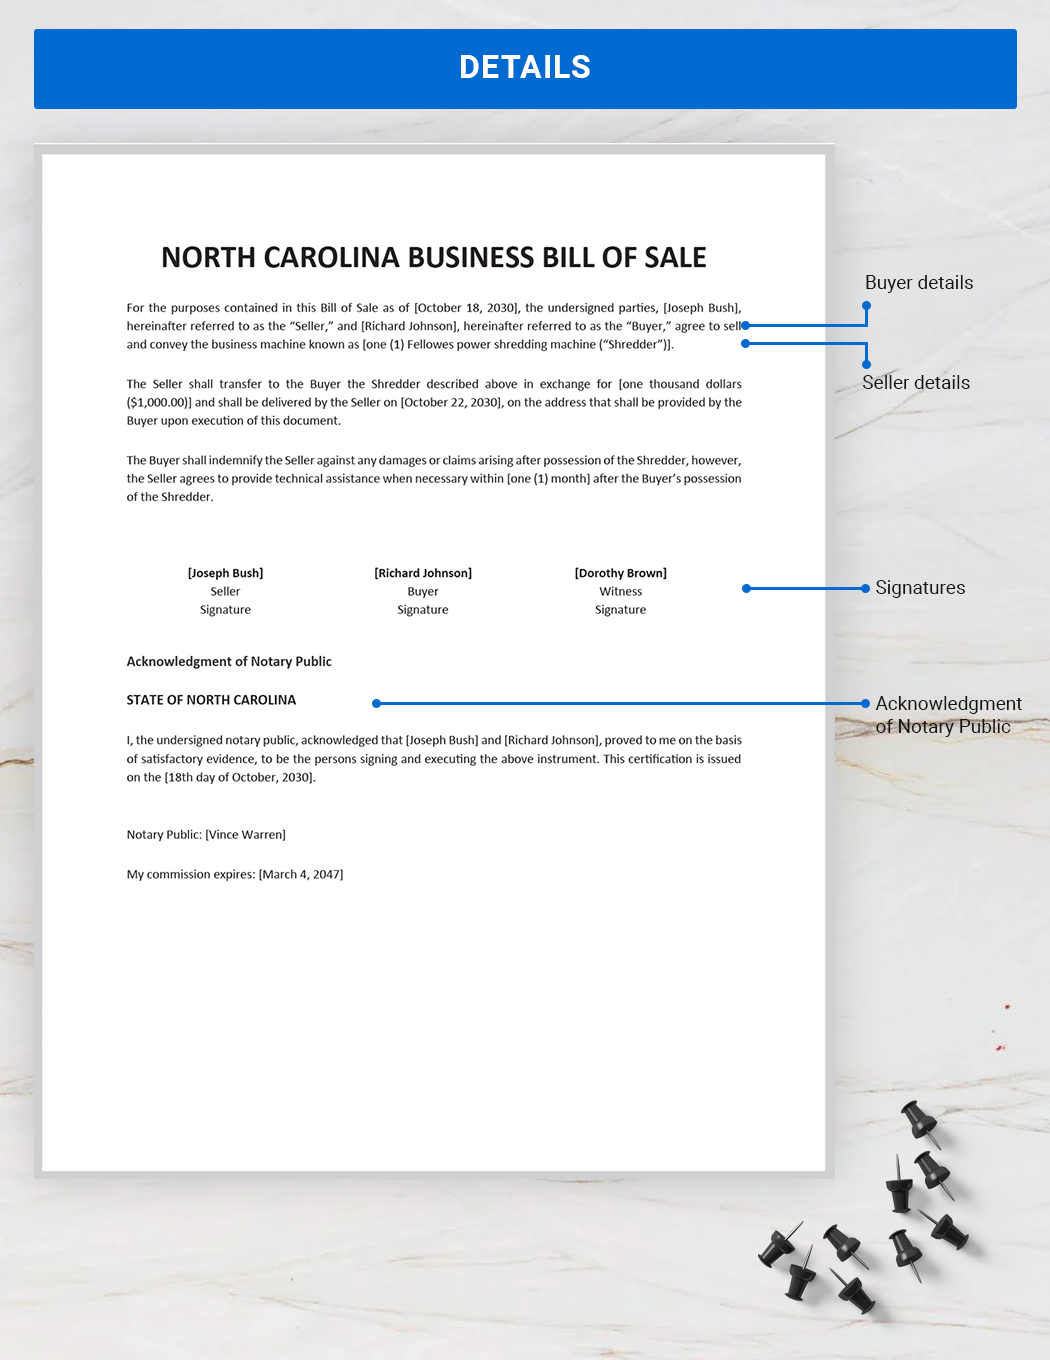 North Carolina Business Bill of Sale Template Download in Word